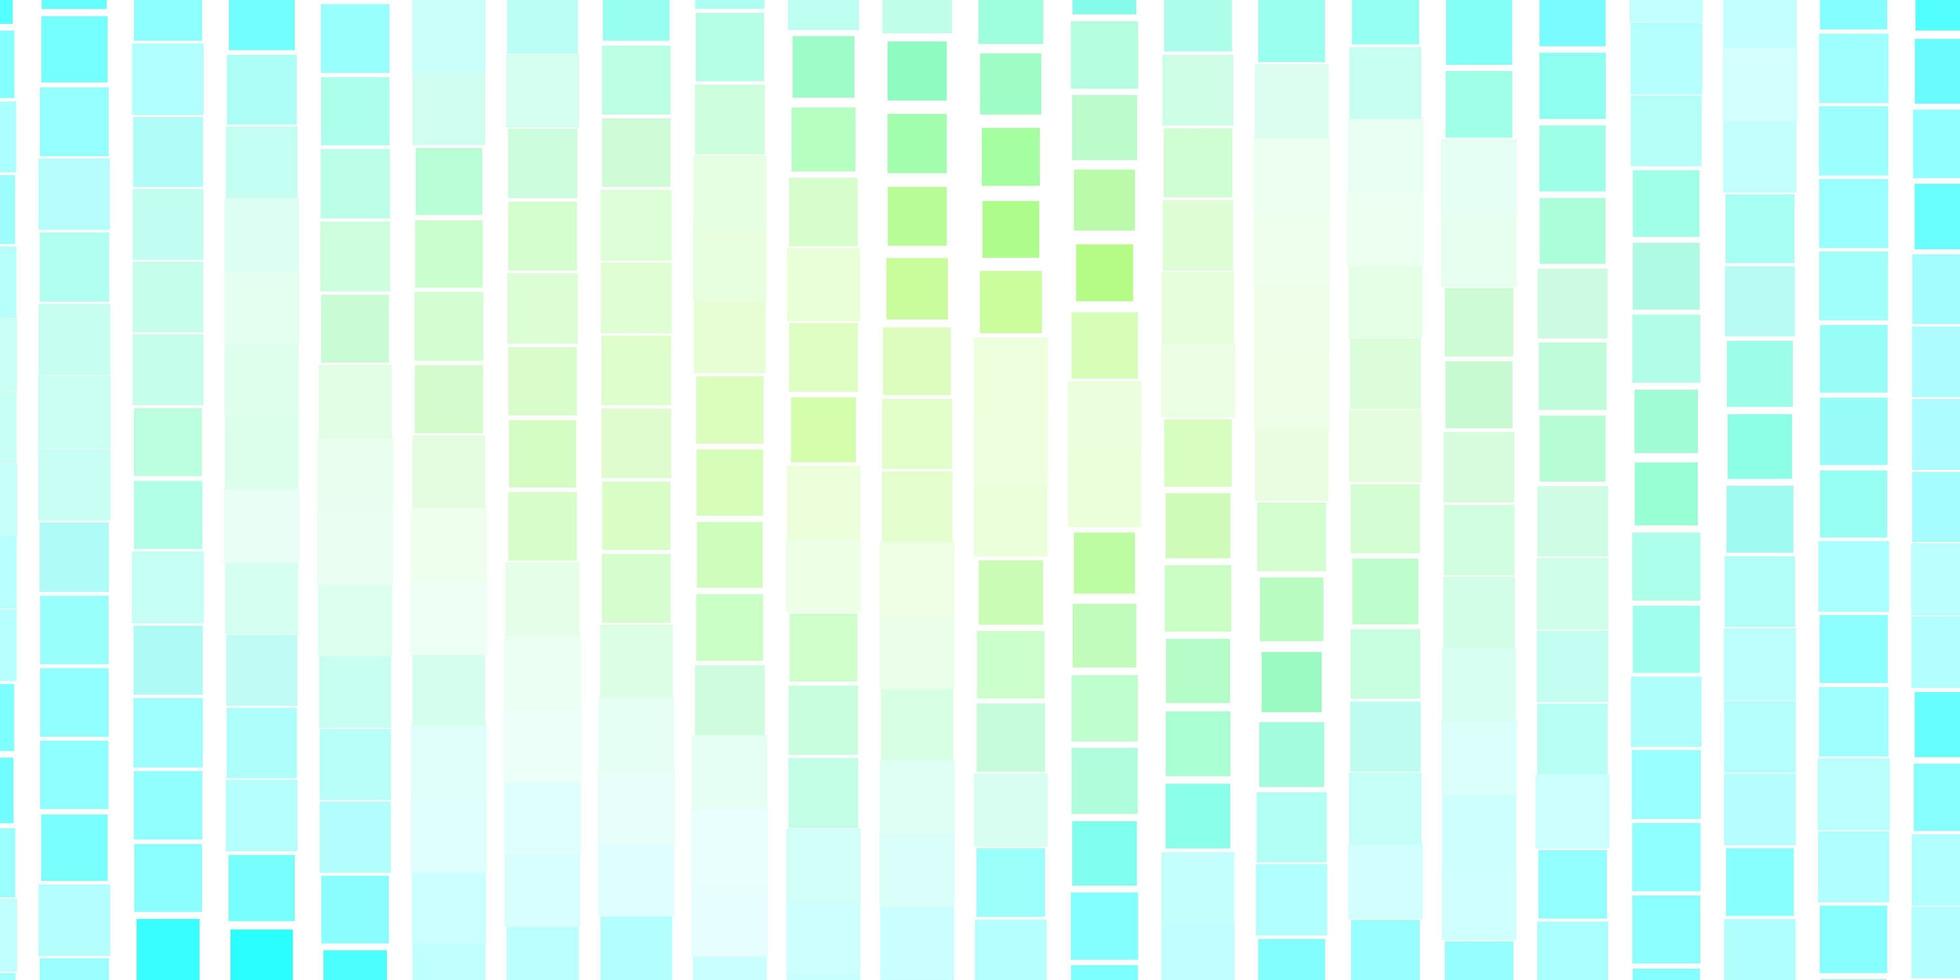 Light BLUE vector layout with lines, rectangles. Colorful illustration with gradient rectangles and squares. Best design for your ad, poster, banner.